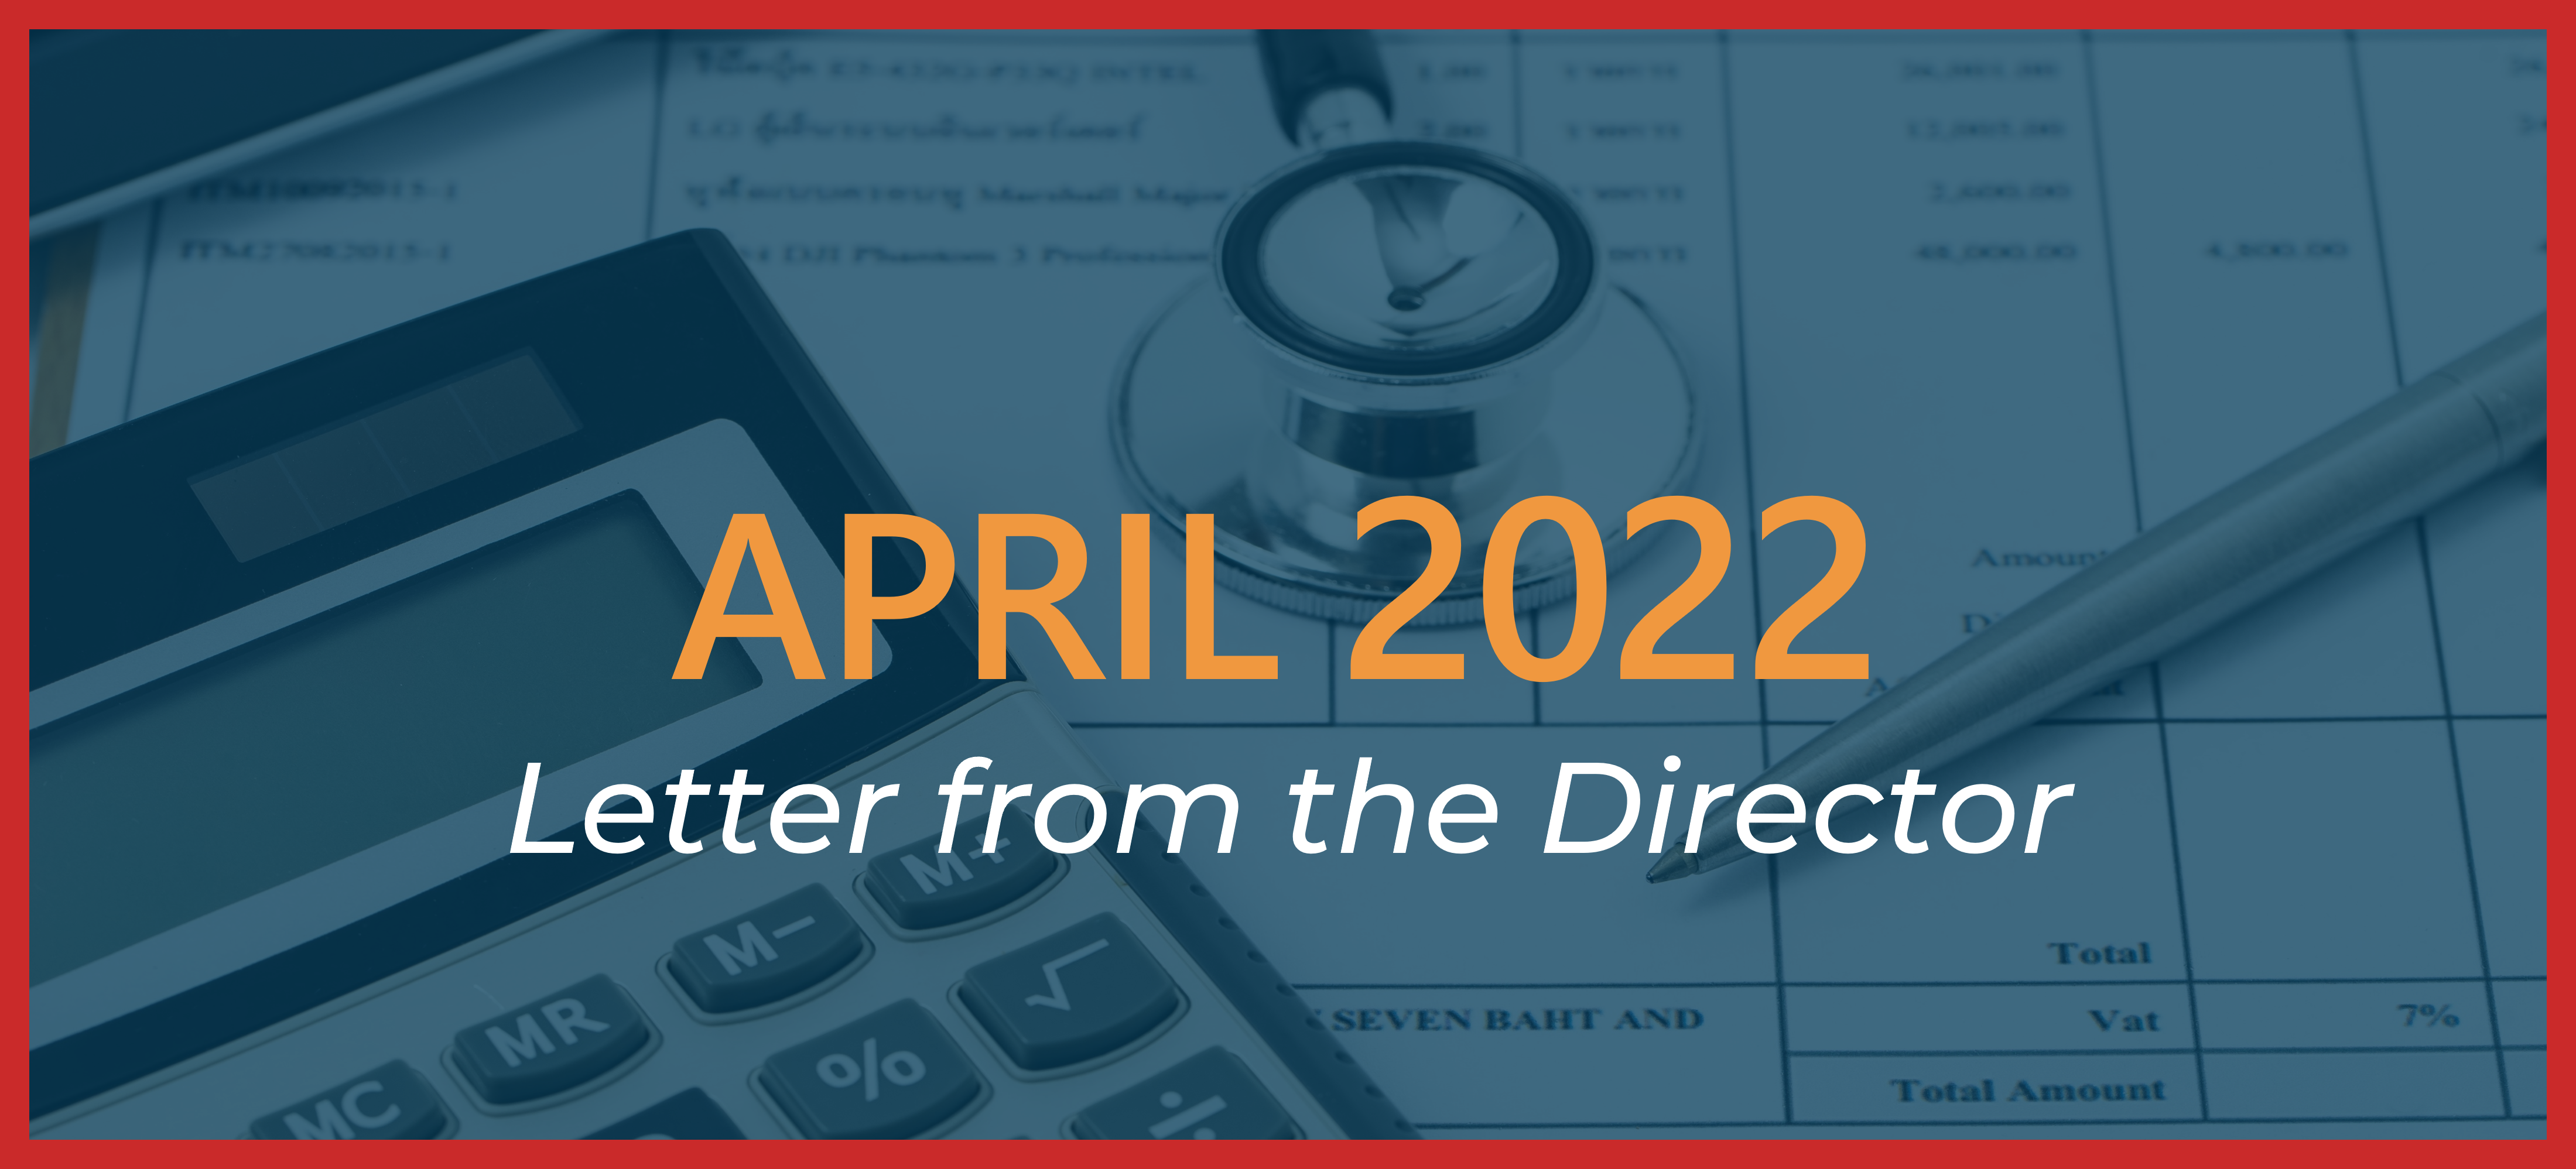 April 2022 Letter from the Director